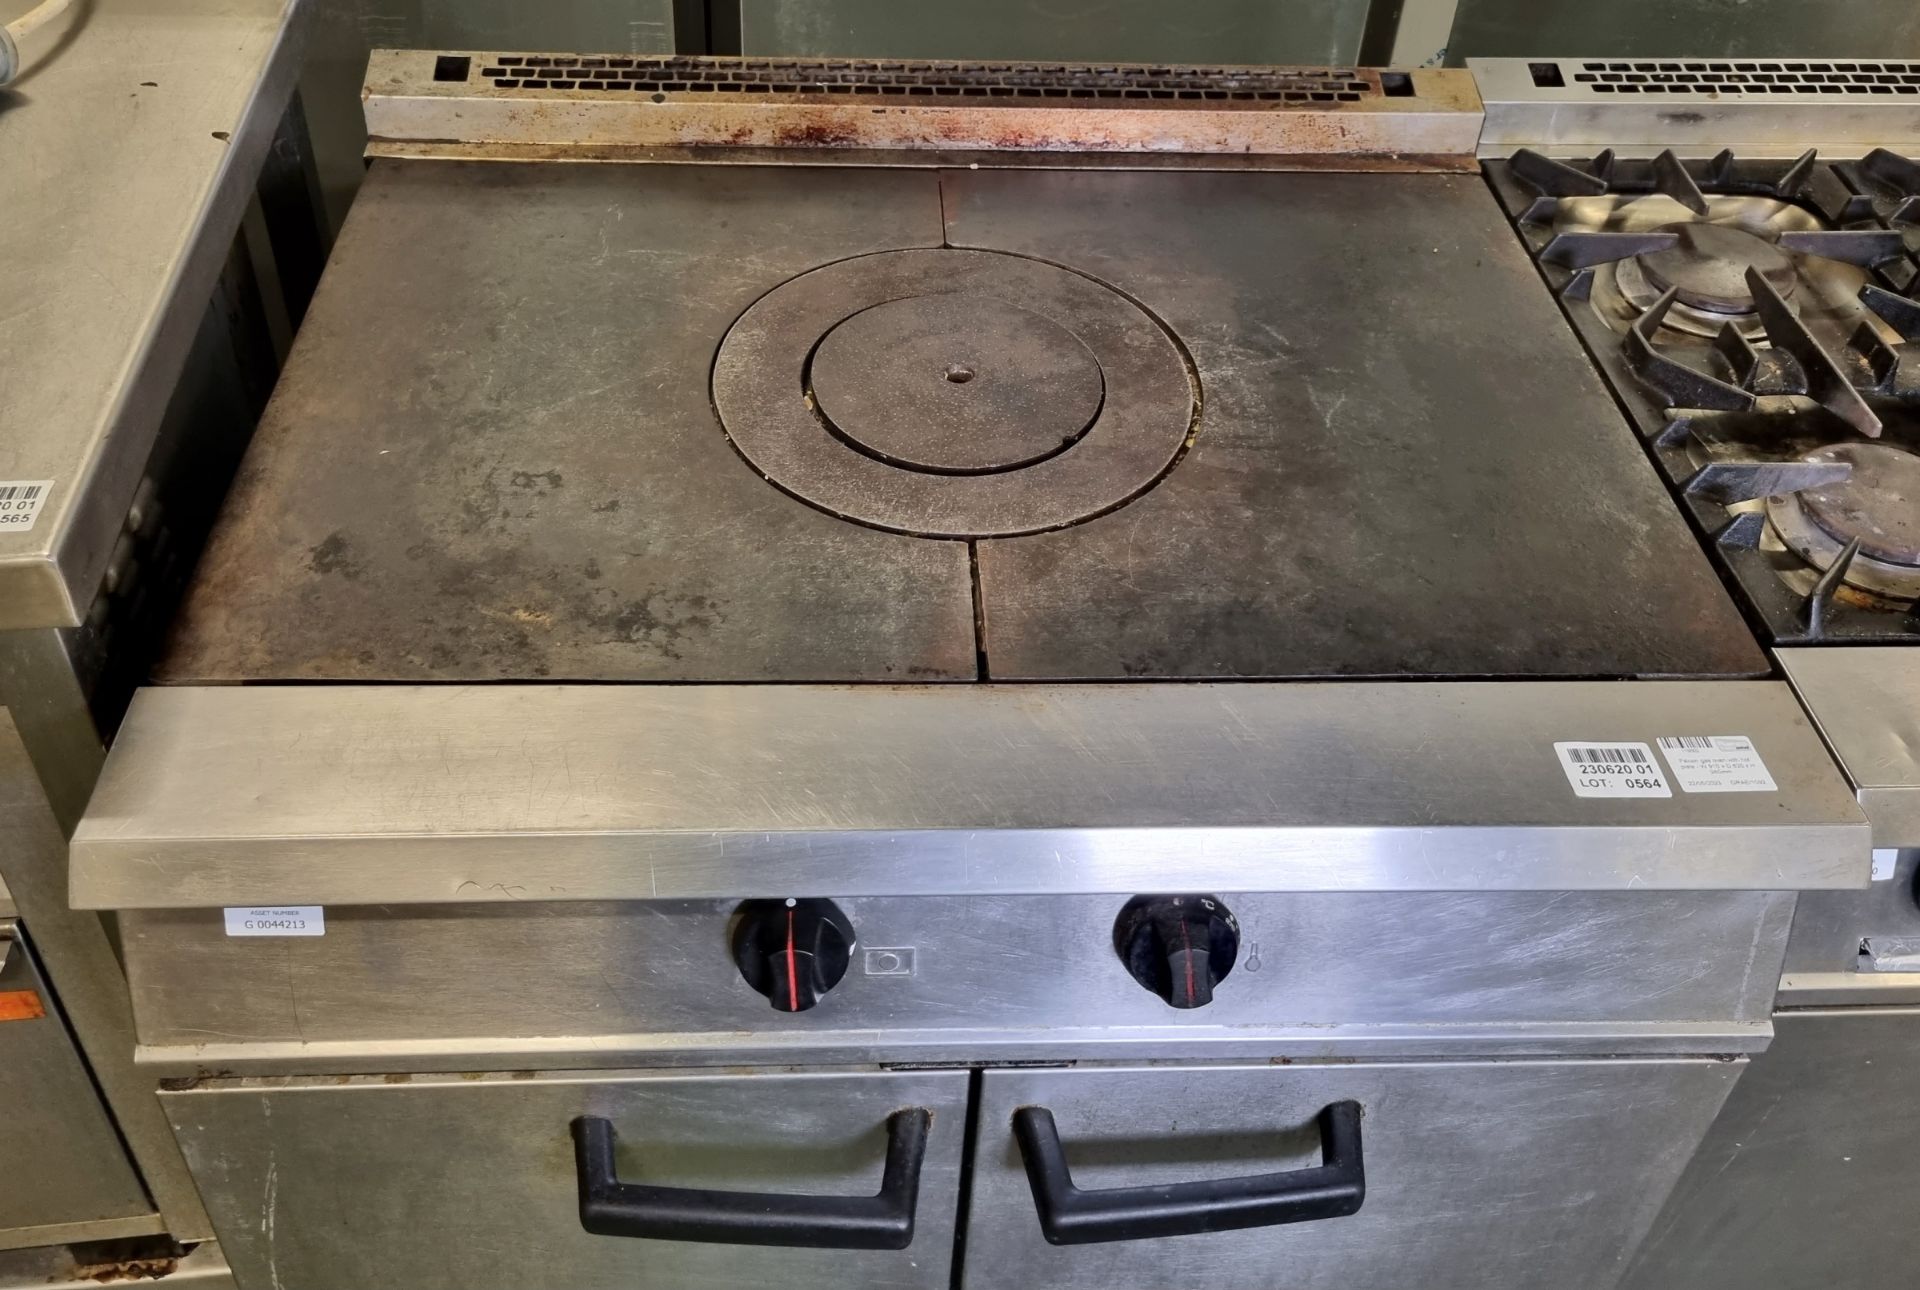 Falcon gas oven with hot plate - W 910 x D 820 x H 980mm - Image 4 of 4